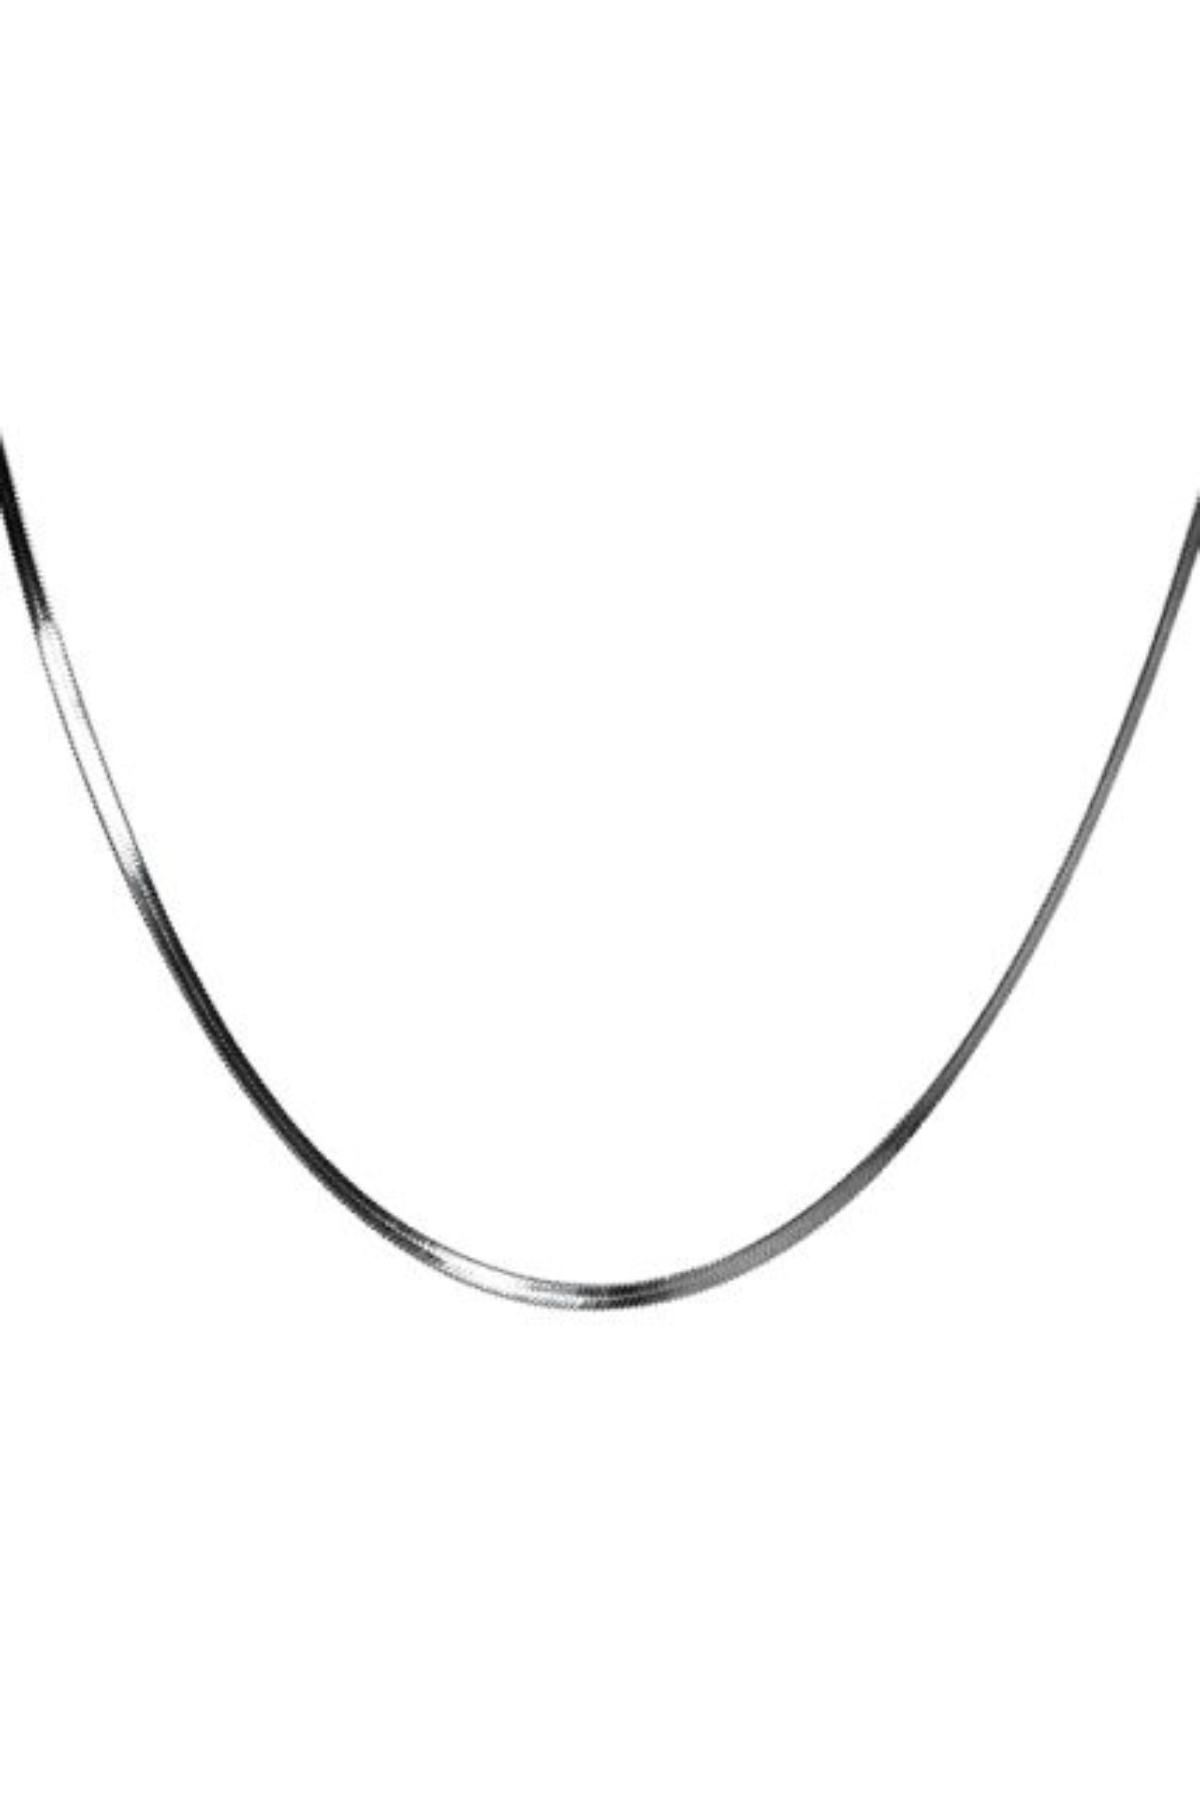 Afterparty Silver Necklace